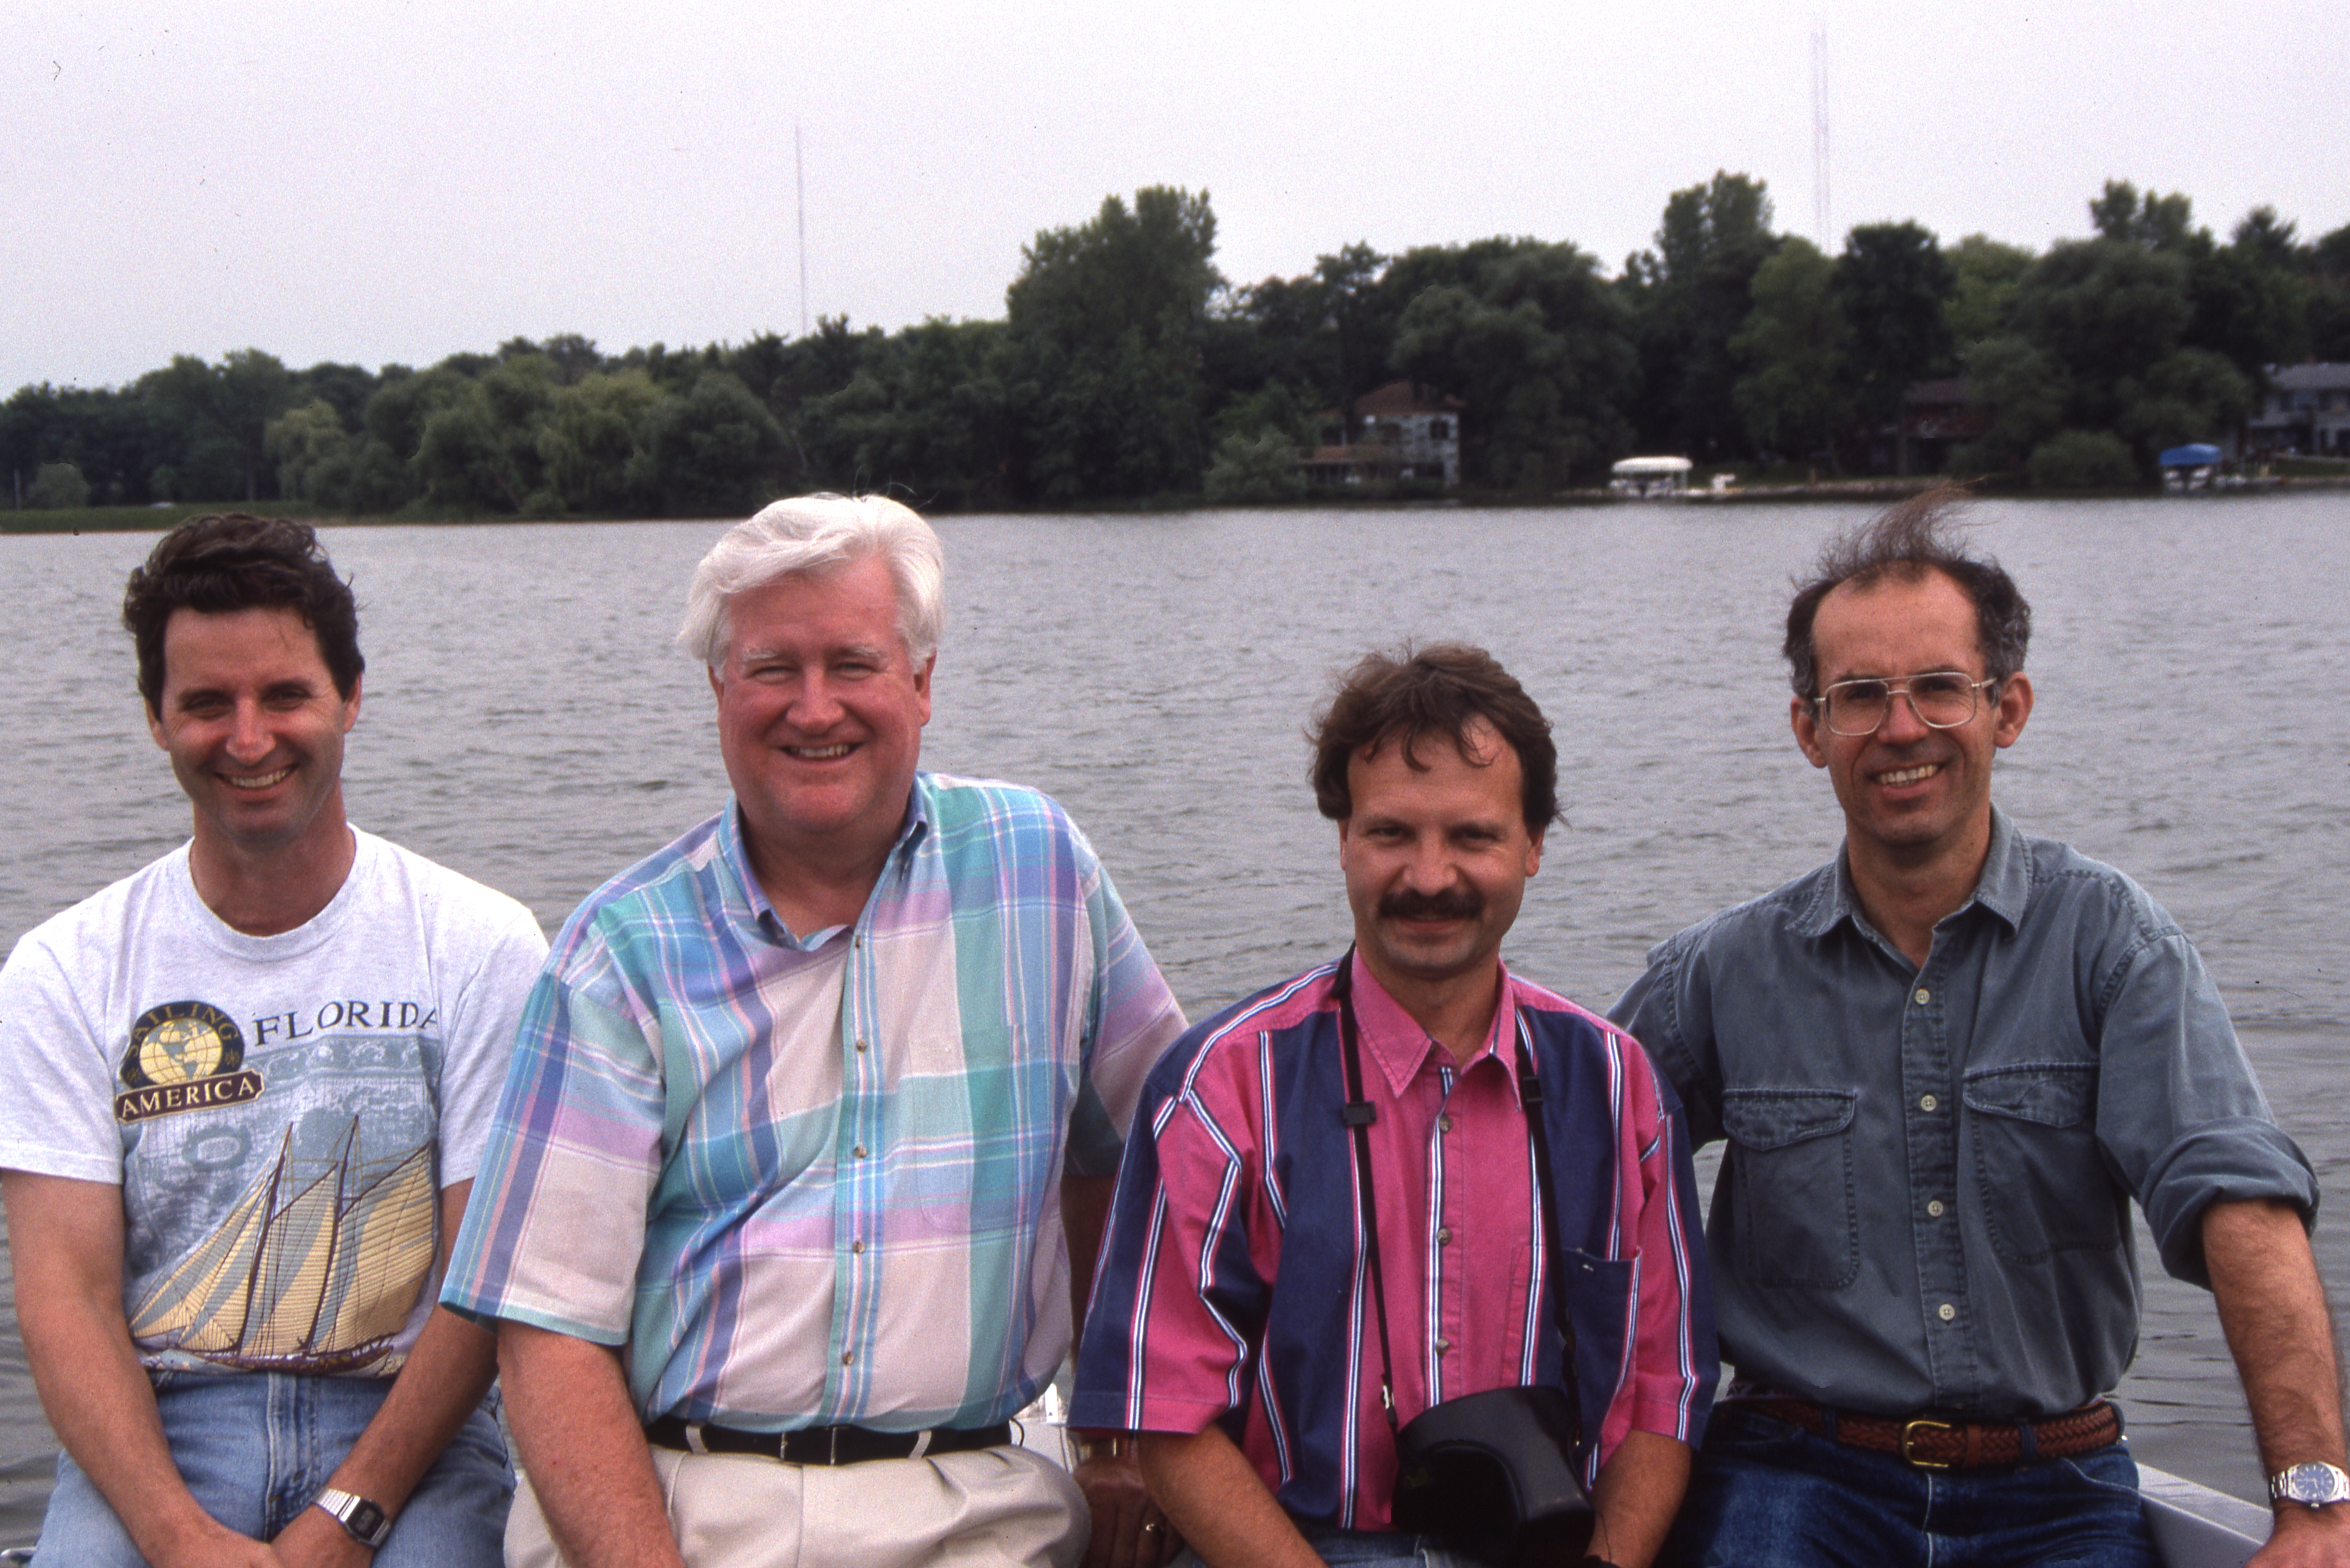 Ken Armstrong, Ron Phillips, Dave Hoffman, and Steve Molnar at Ron's home near Minneapolis